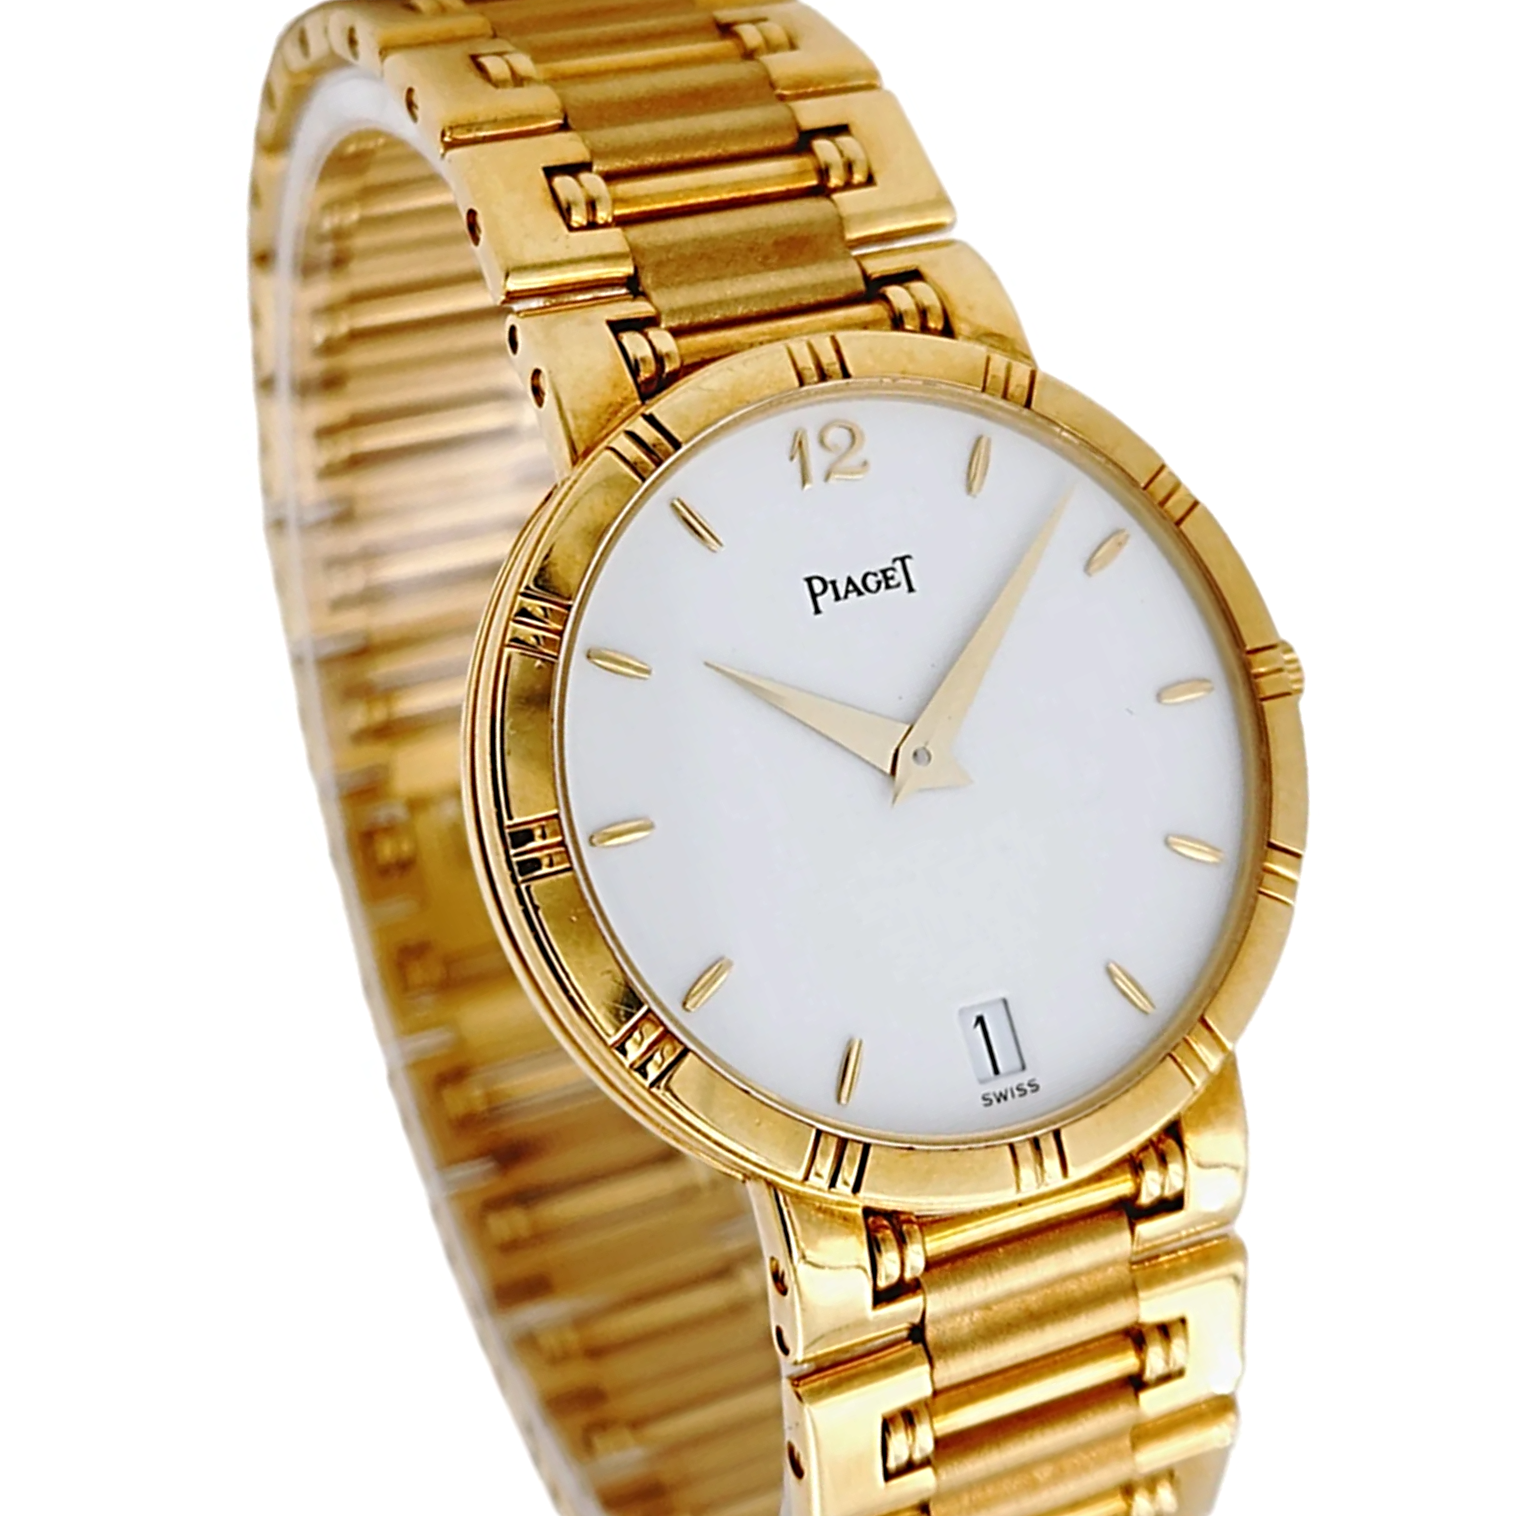 *Men's Piaget 31mm Dancer Vintage Solid 18K Yellow Gold Band Watch with White Dial. (Pre-Owned)